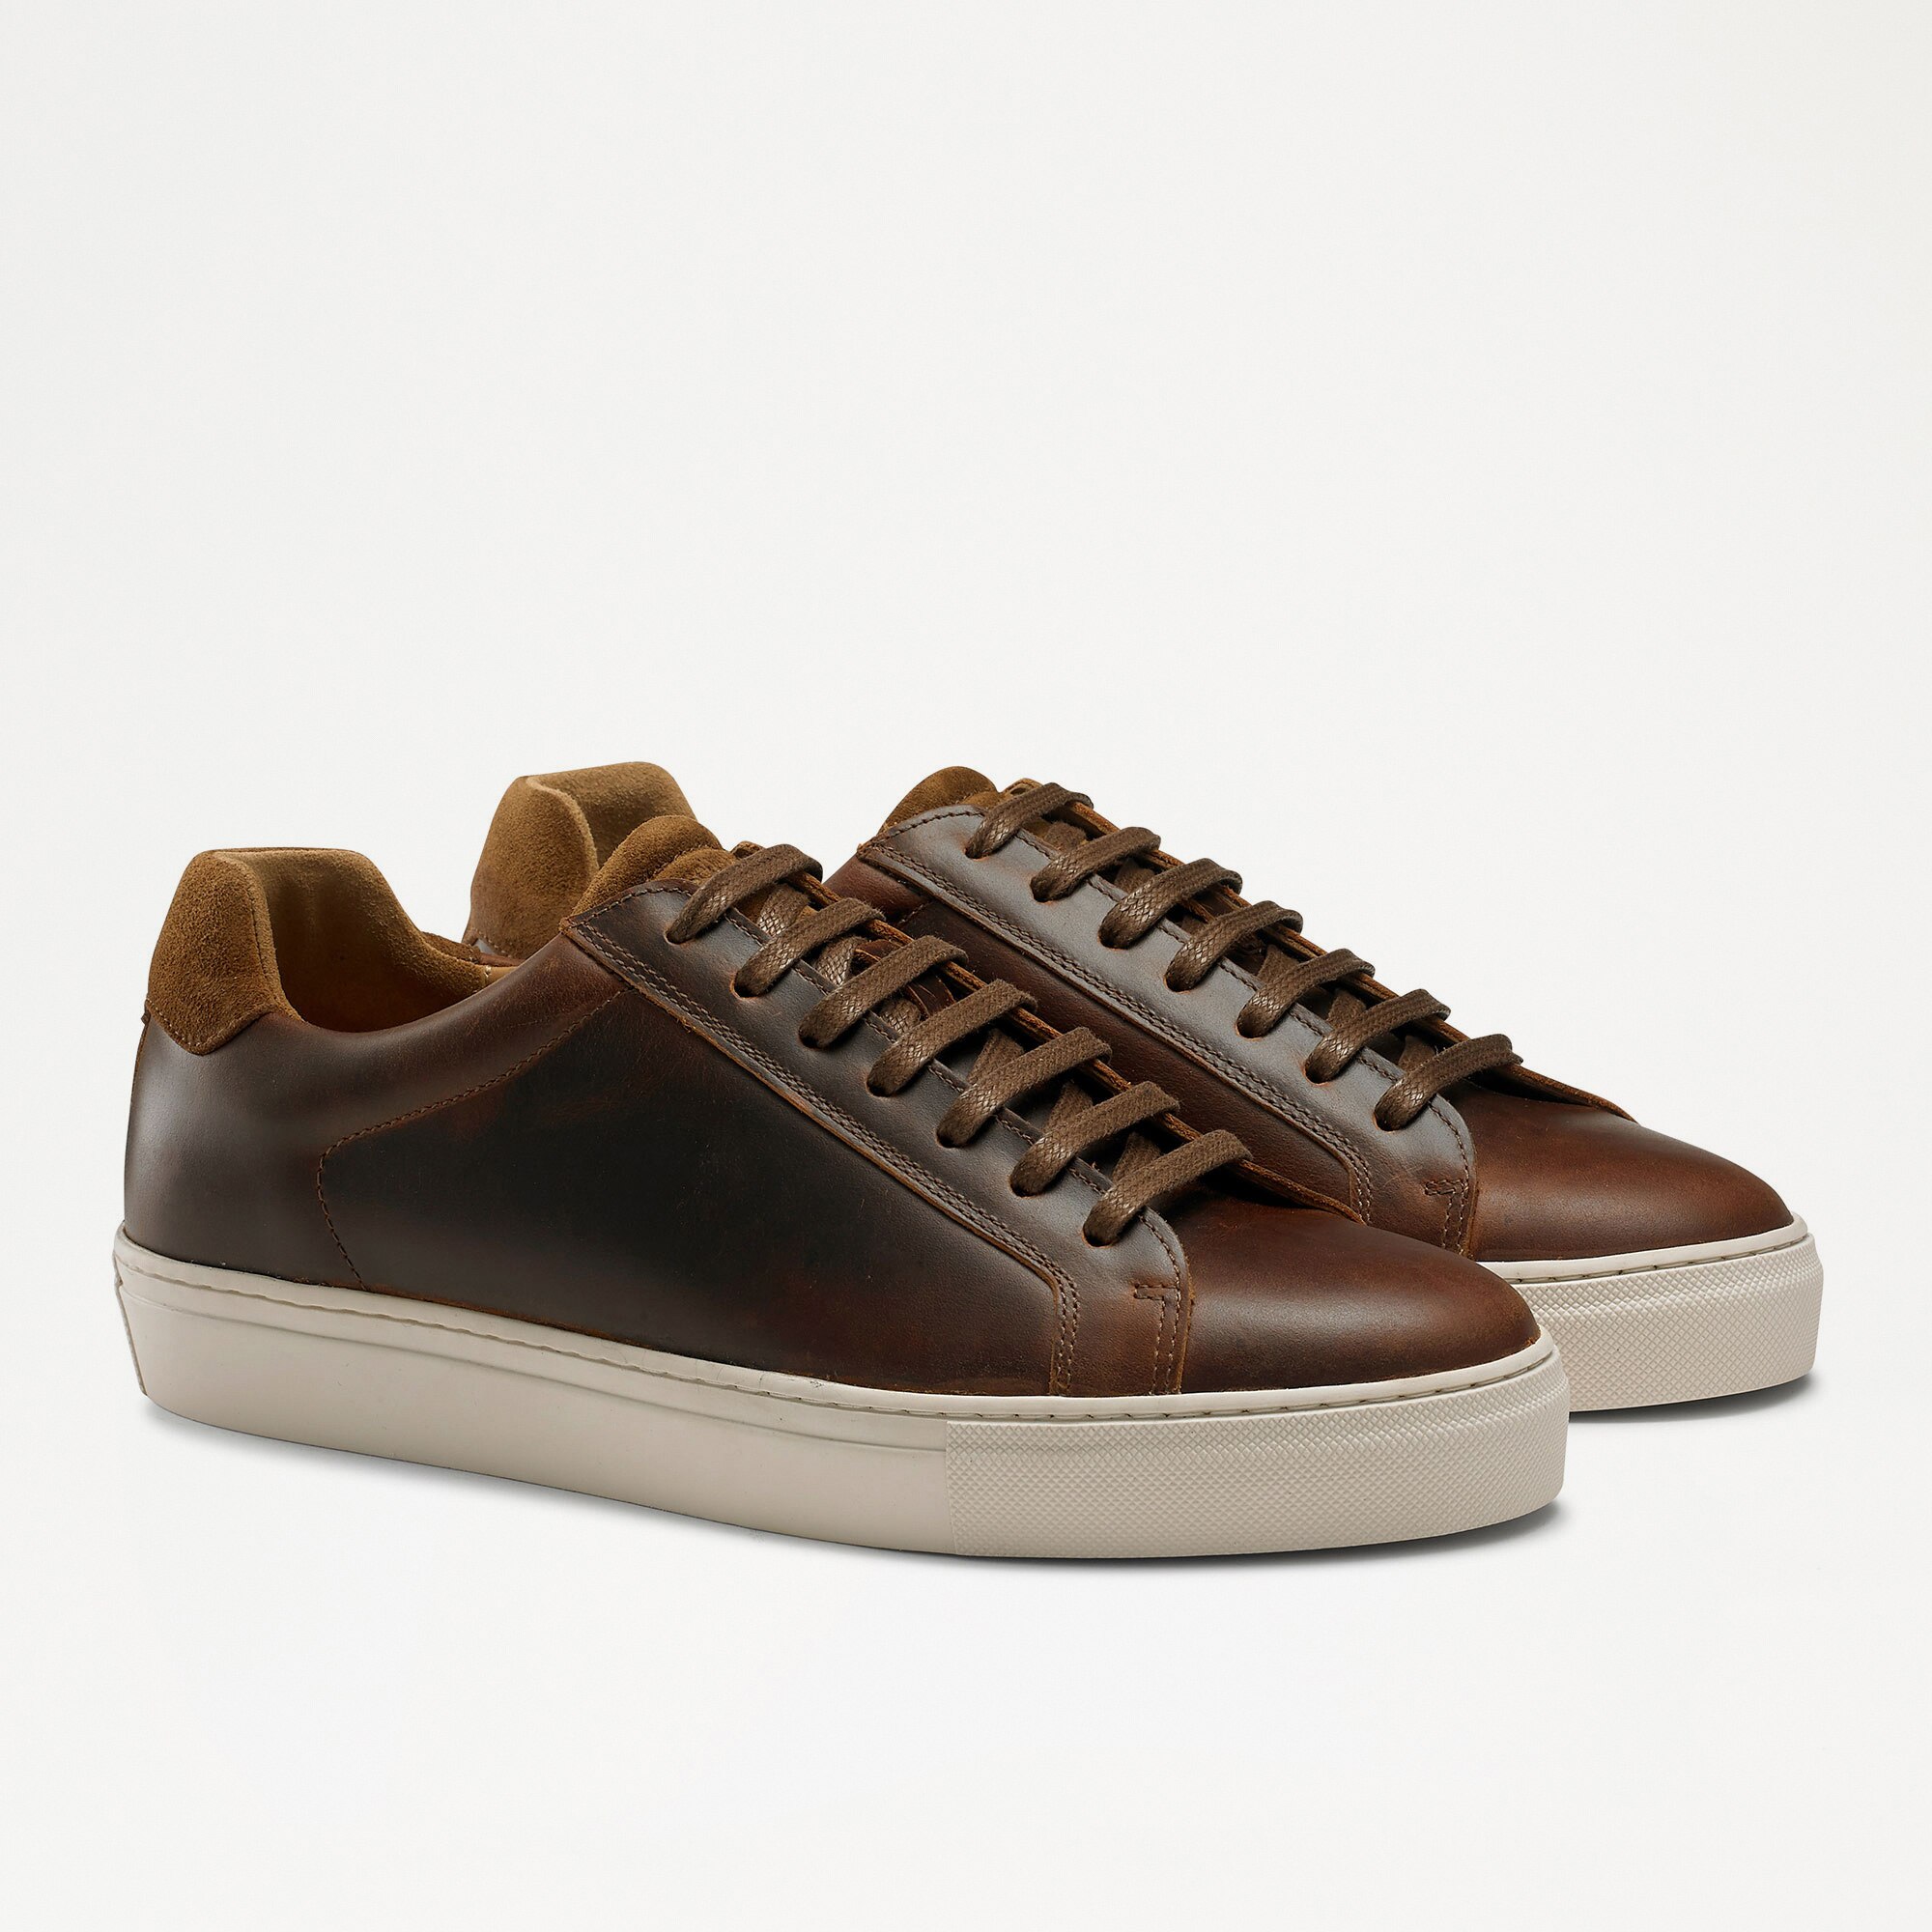 DOWNFIELD Derby Lace Up Sneaker in Brown Waxy Leather | Russell & Bromley